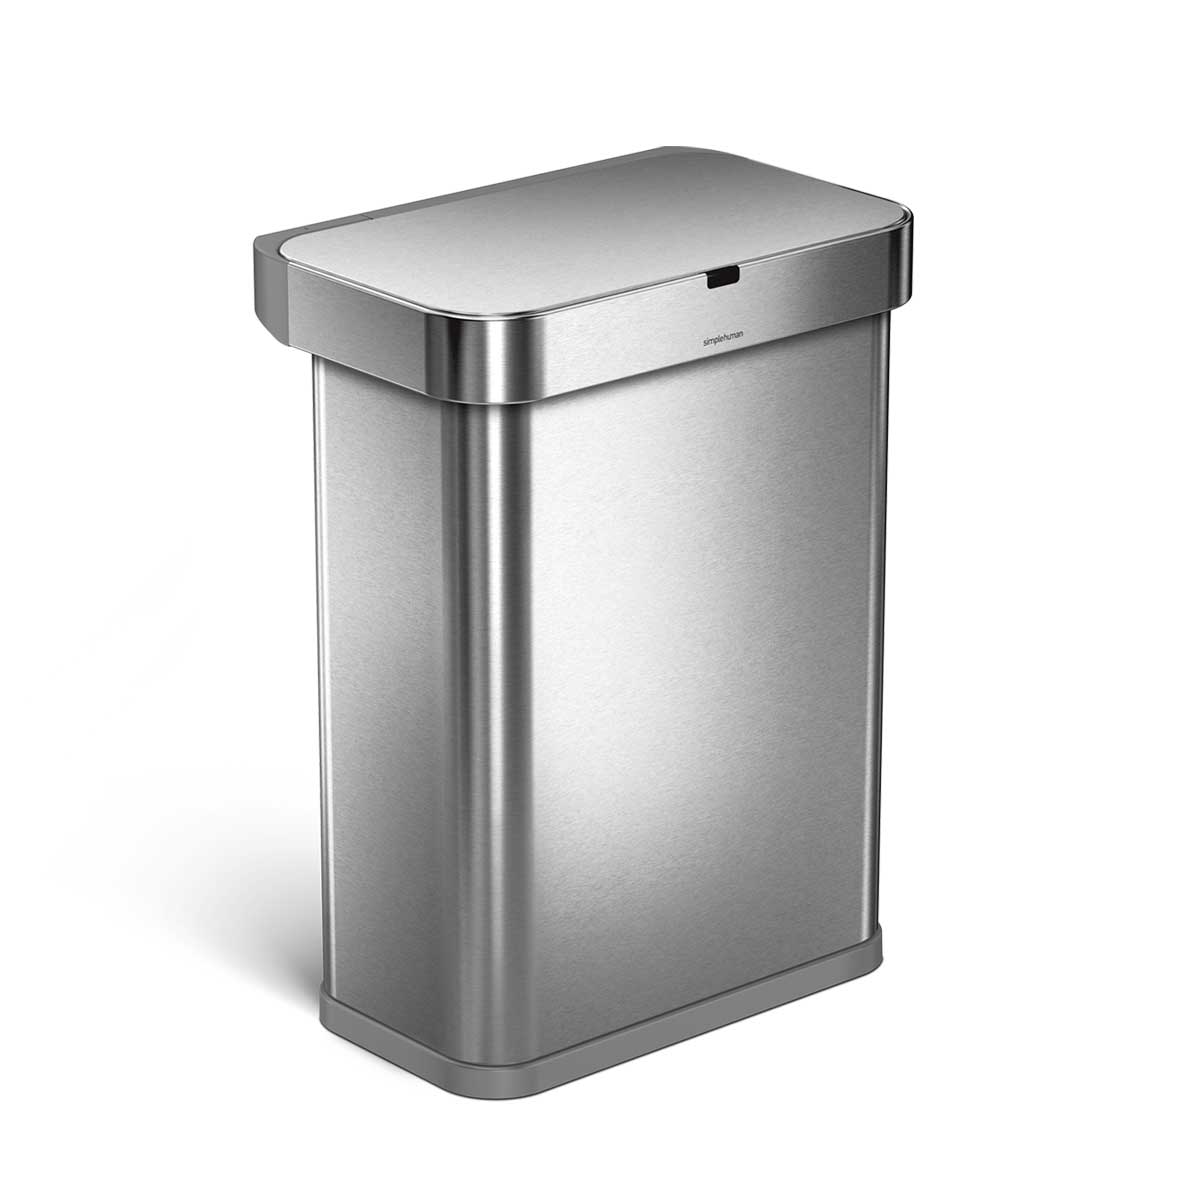 simplehuman 58L rectangular sensor can with voice control, brushed stainless steel